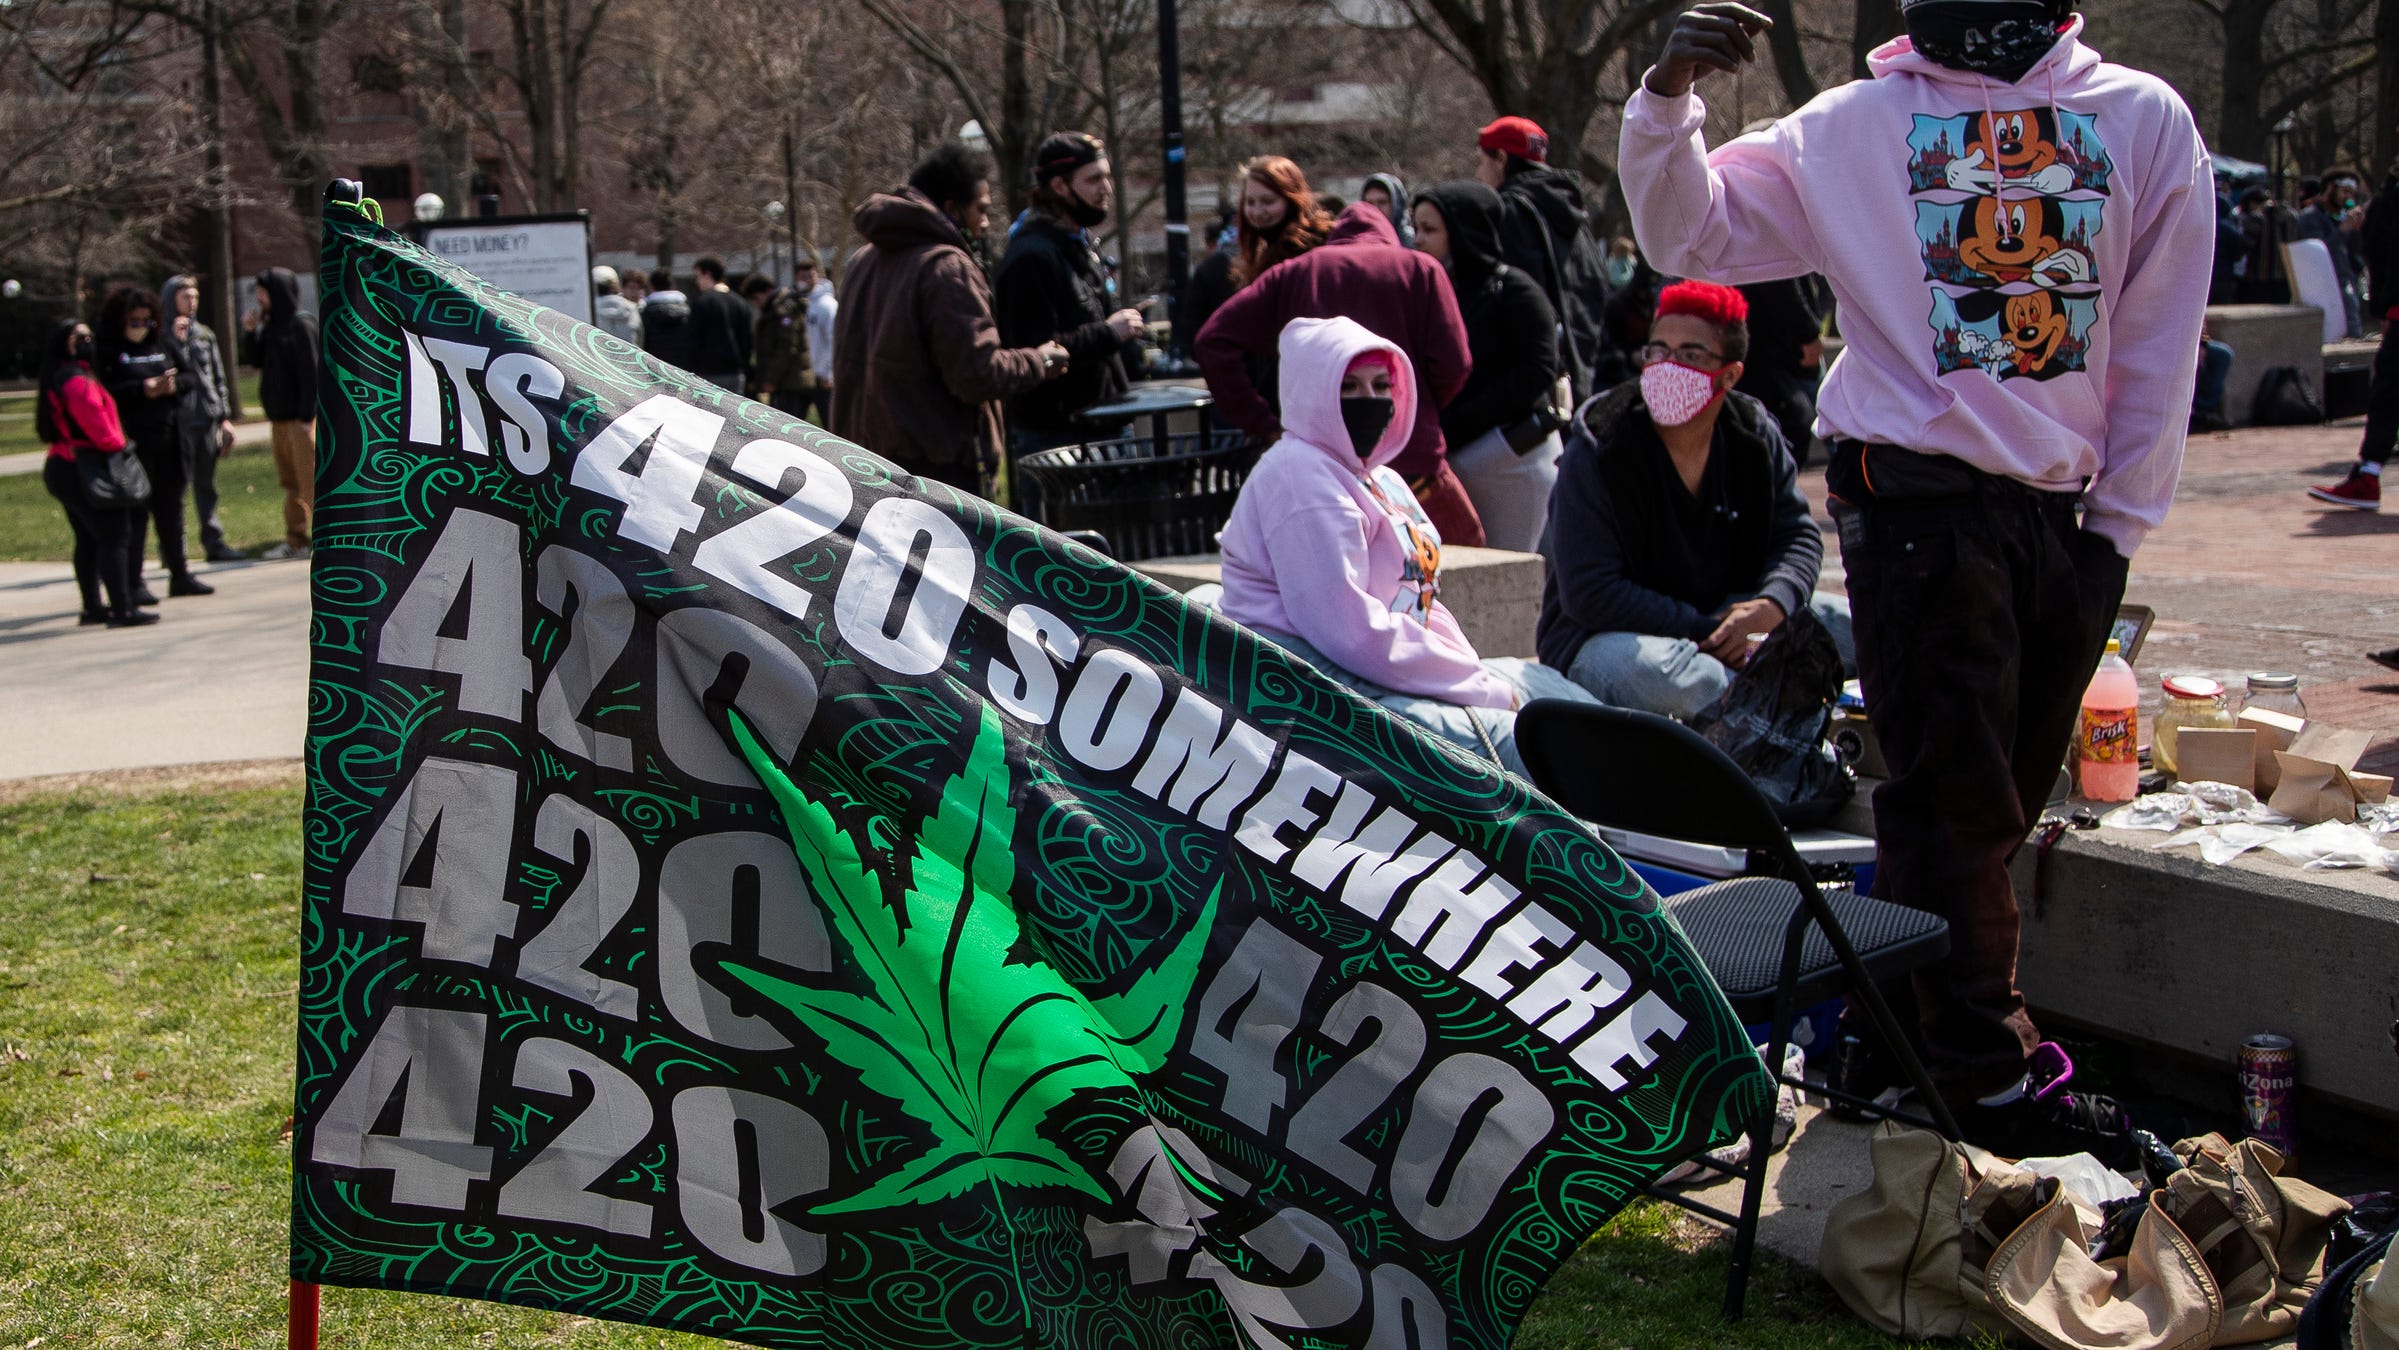 Hash Bash attendees roll up to Ann Arbor, defy UM warnings